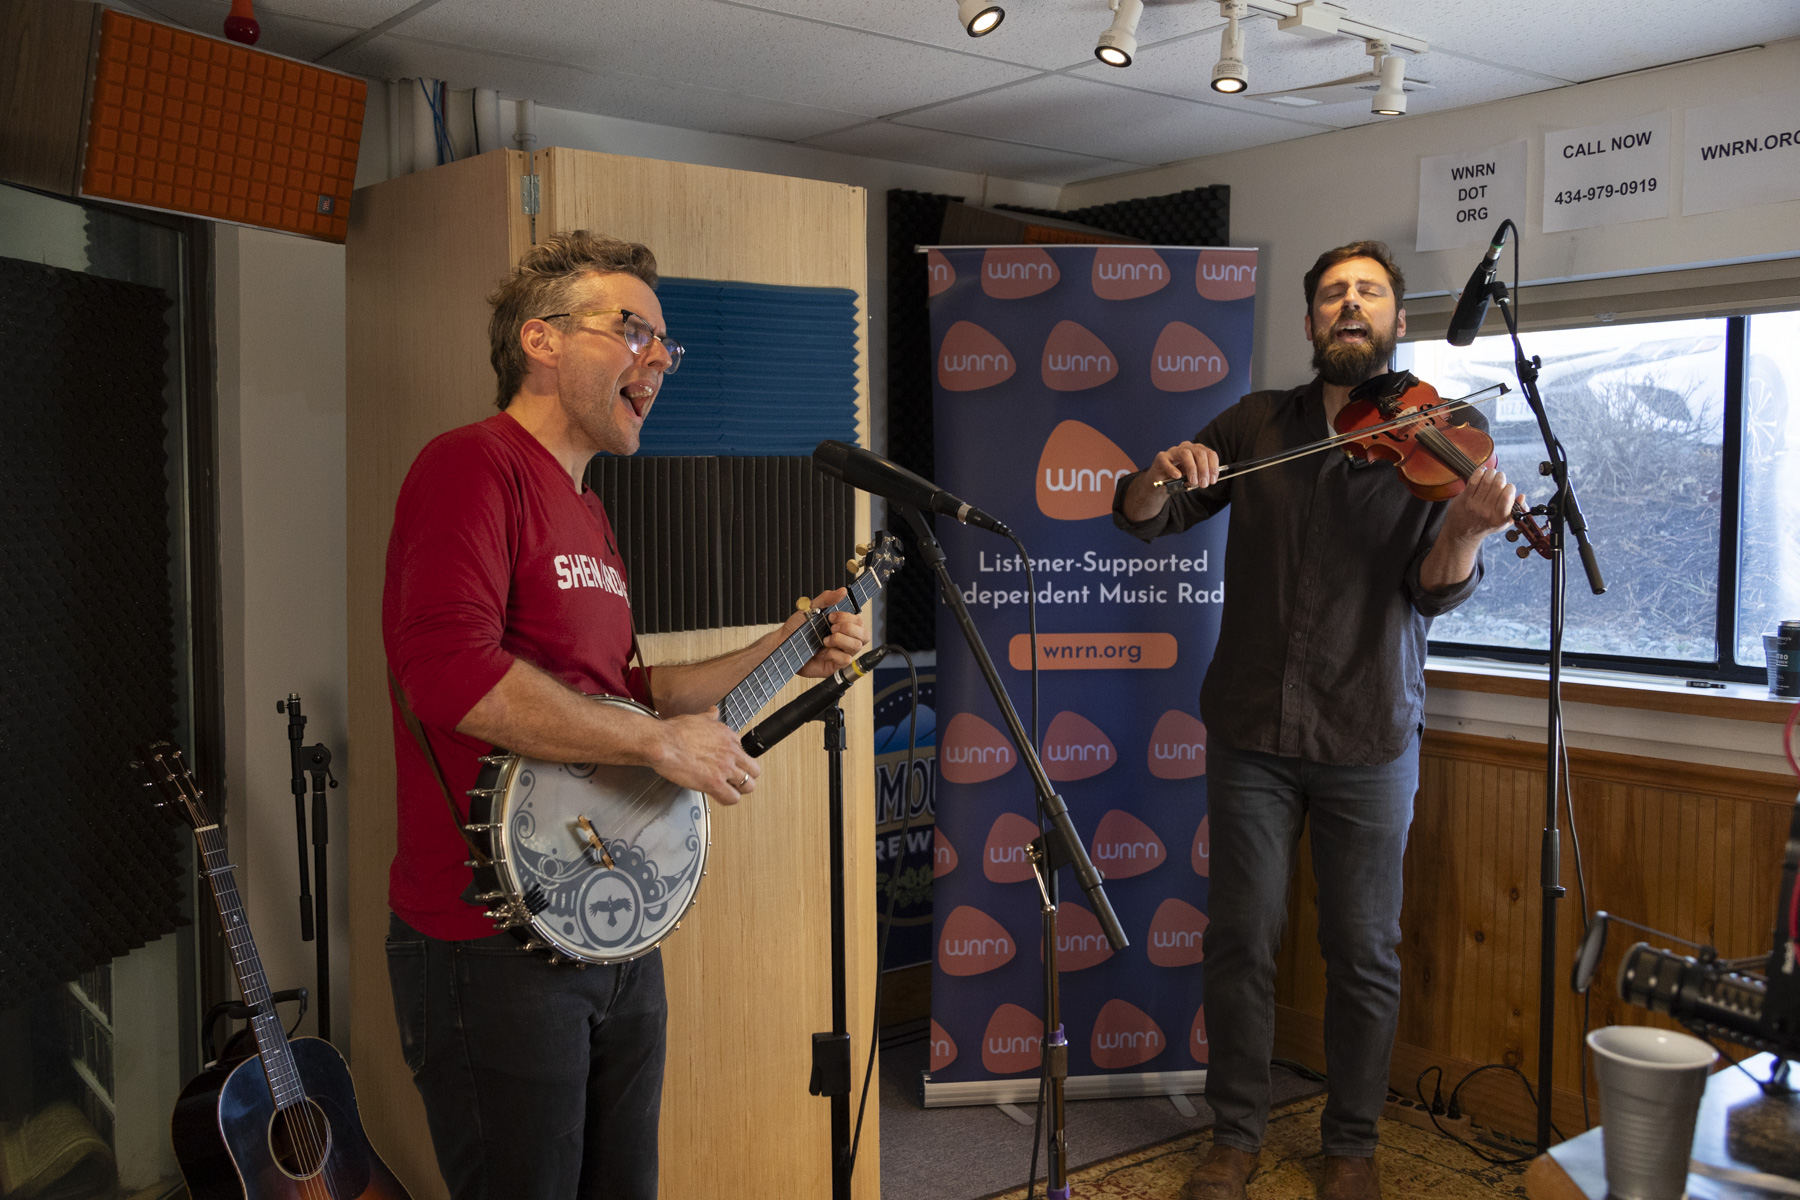 Trent and Eric of The Steel Wheels perform in the WNRN studio